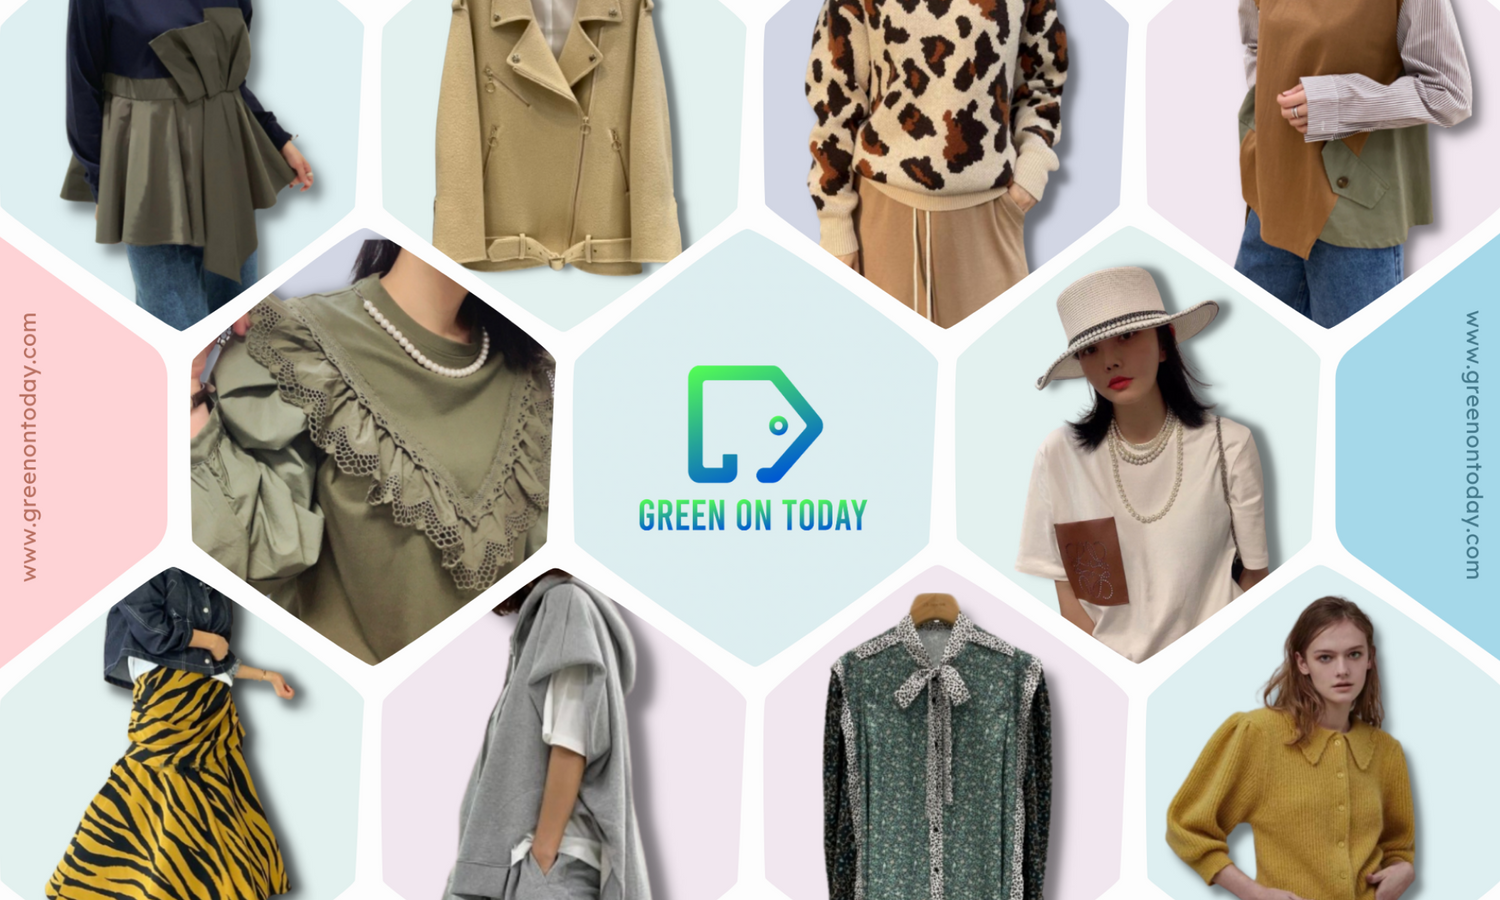 A variety of Dongdaemum Women's Clothing Collection, reflecting the sophistication of Korean fashion.